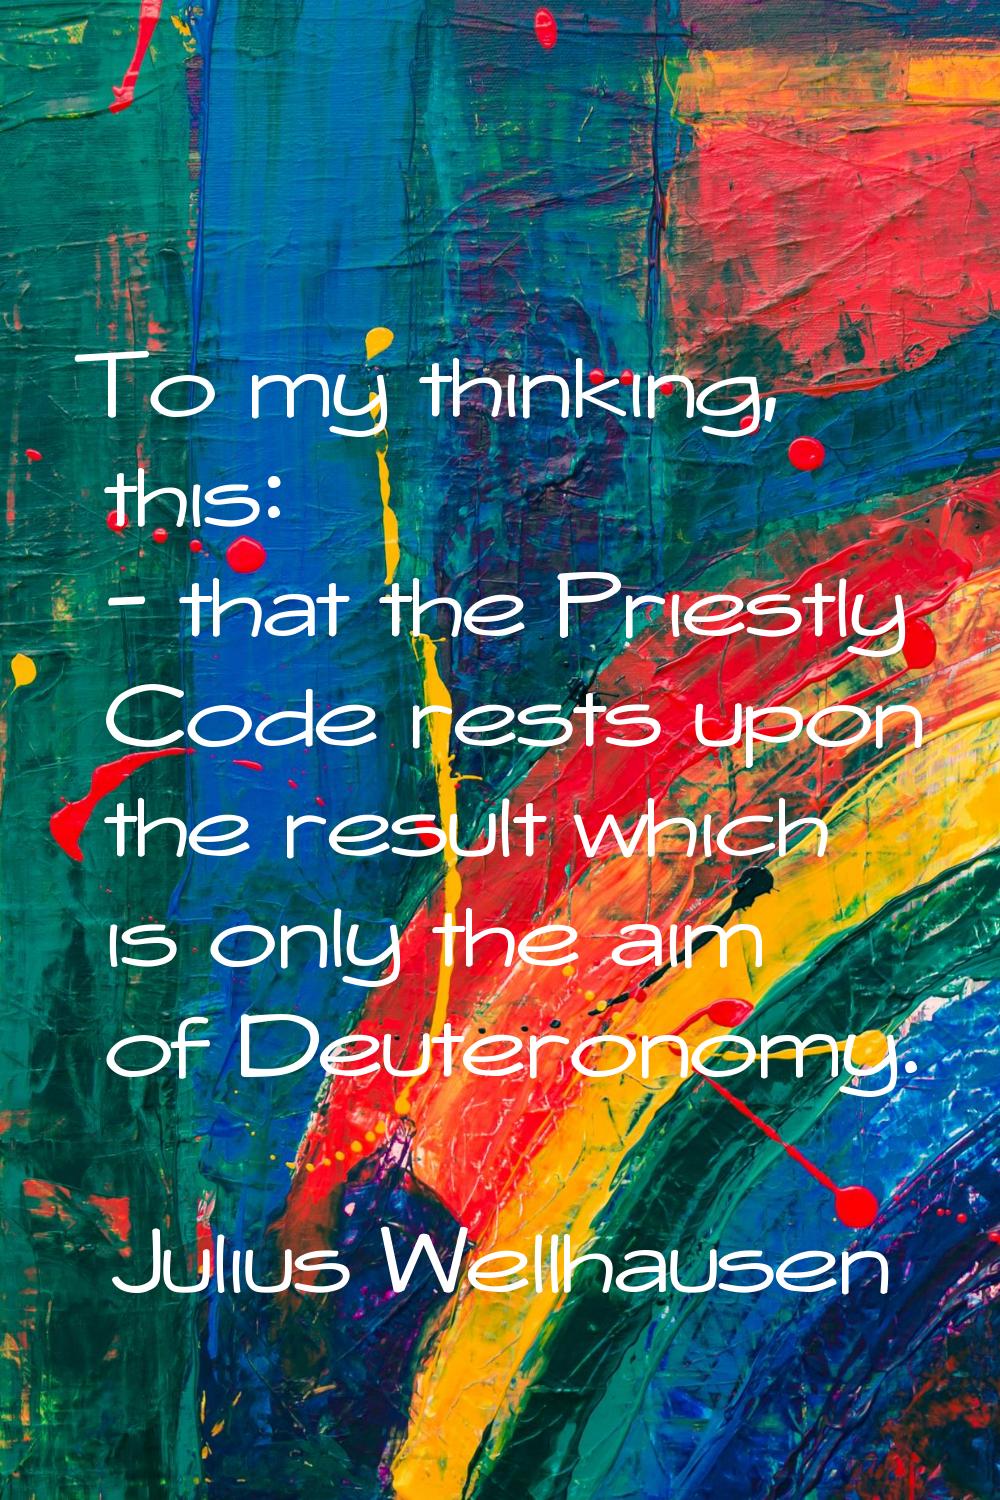 To my thinking, this: - that the Priestly Code rests upon the result which is only the aim of Deute